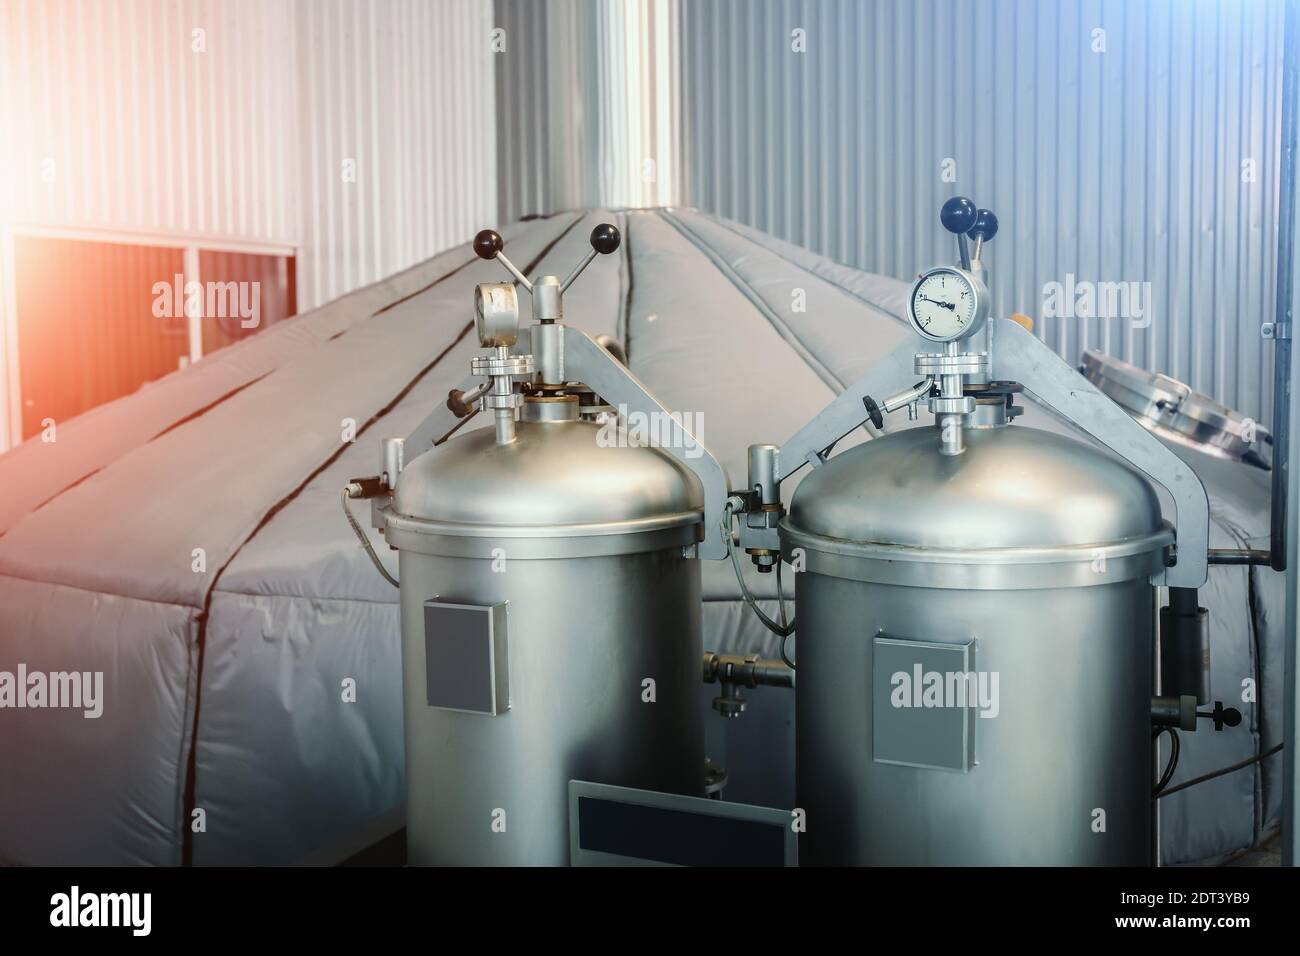 Manometer on brewery equipment steel cylinder with gas in and hop dispenser. Stock Photo